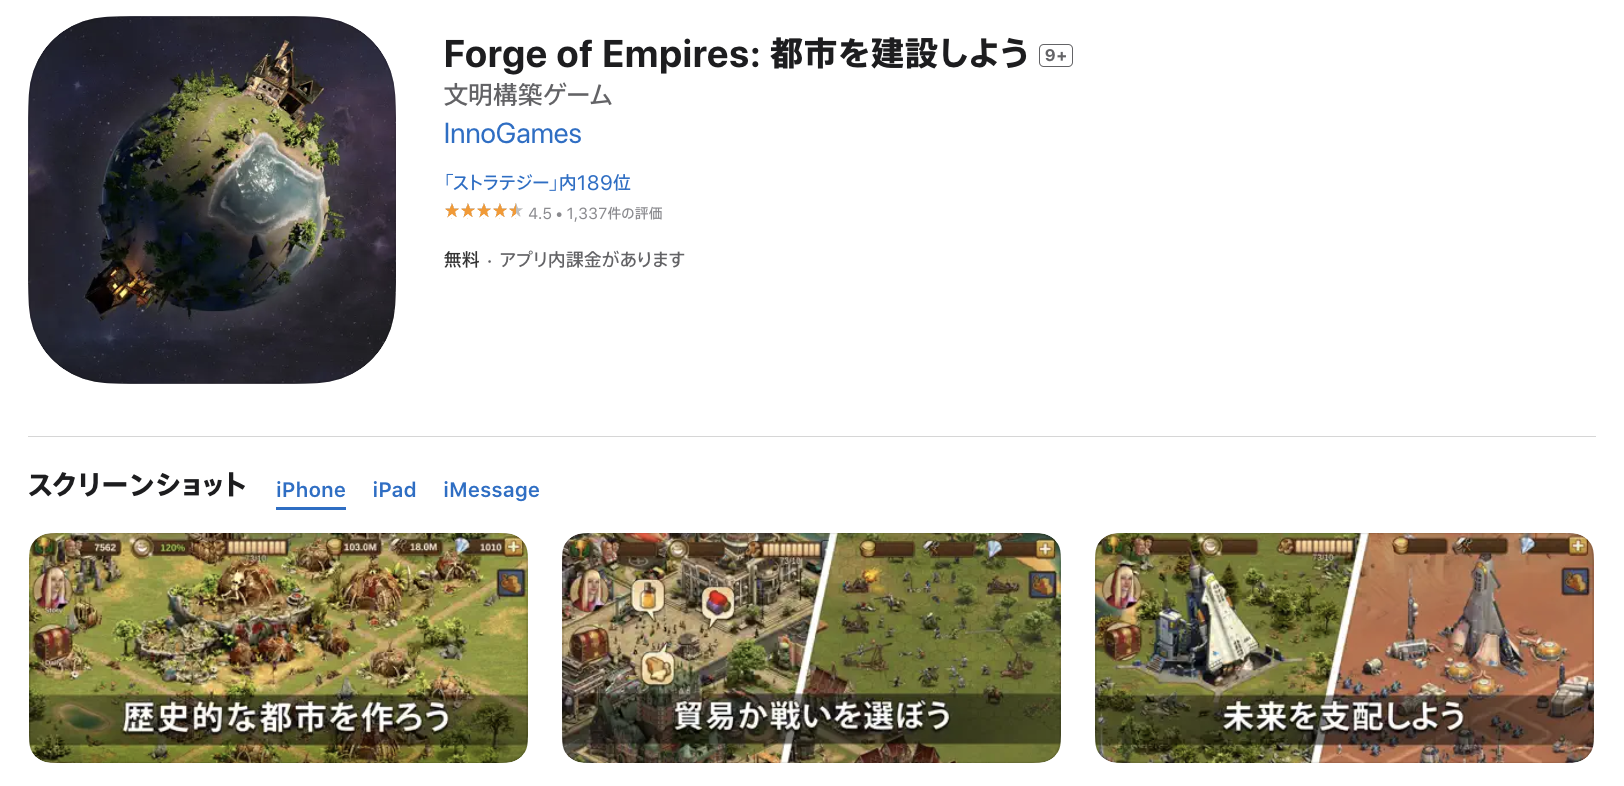 Forge of Empires_アイキャッチ